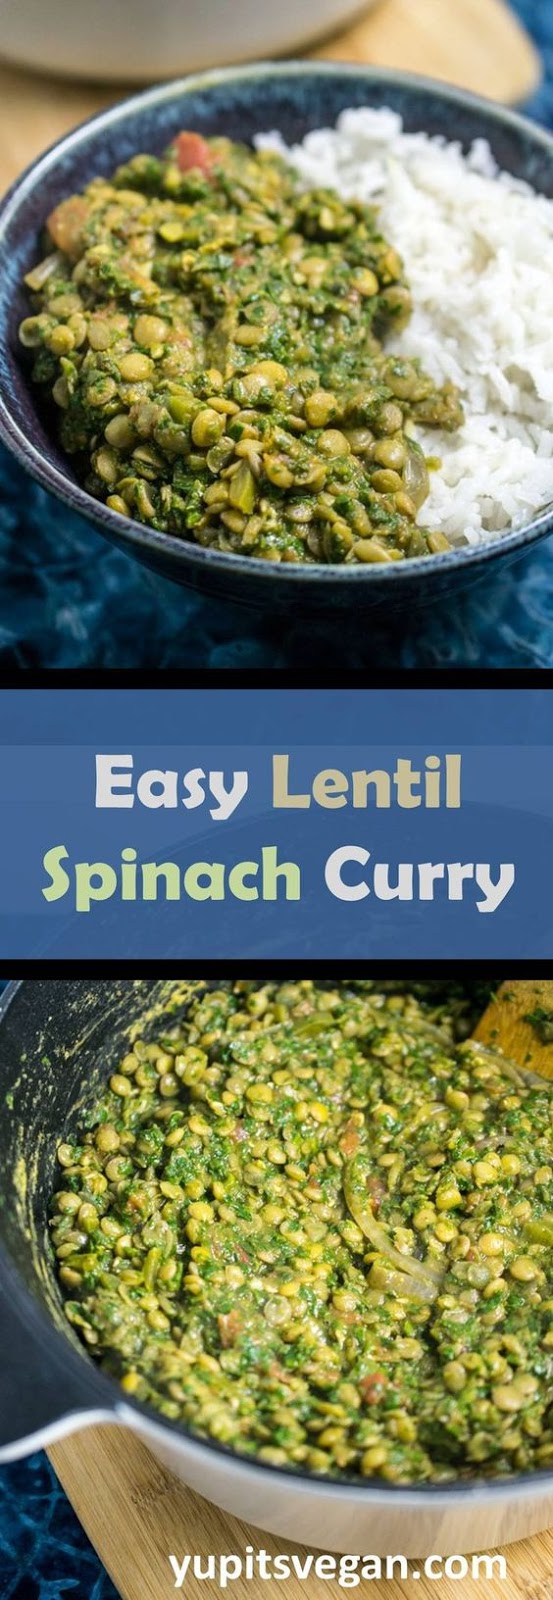 LENTIL SPINACH CURRY WITH COCONUT RICE